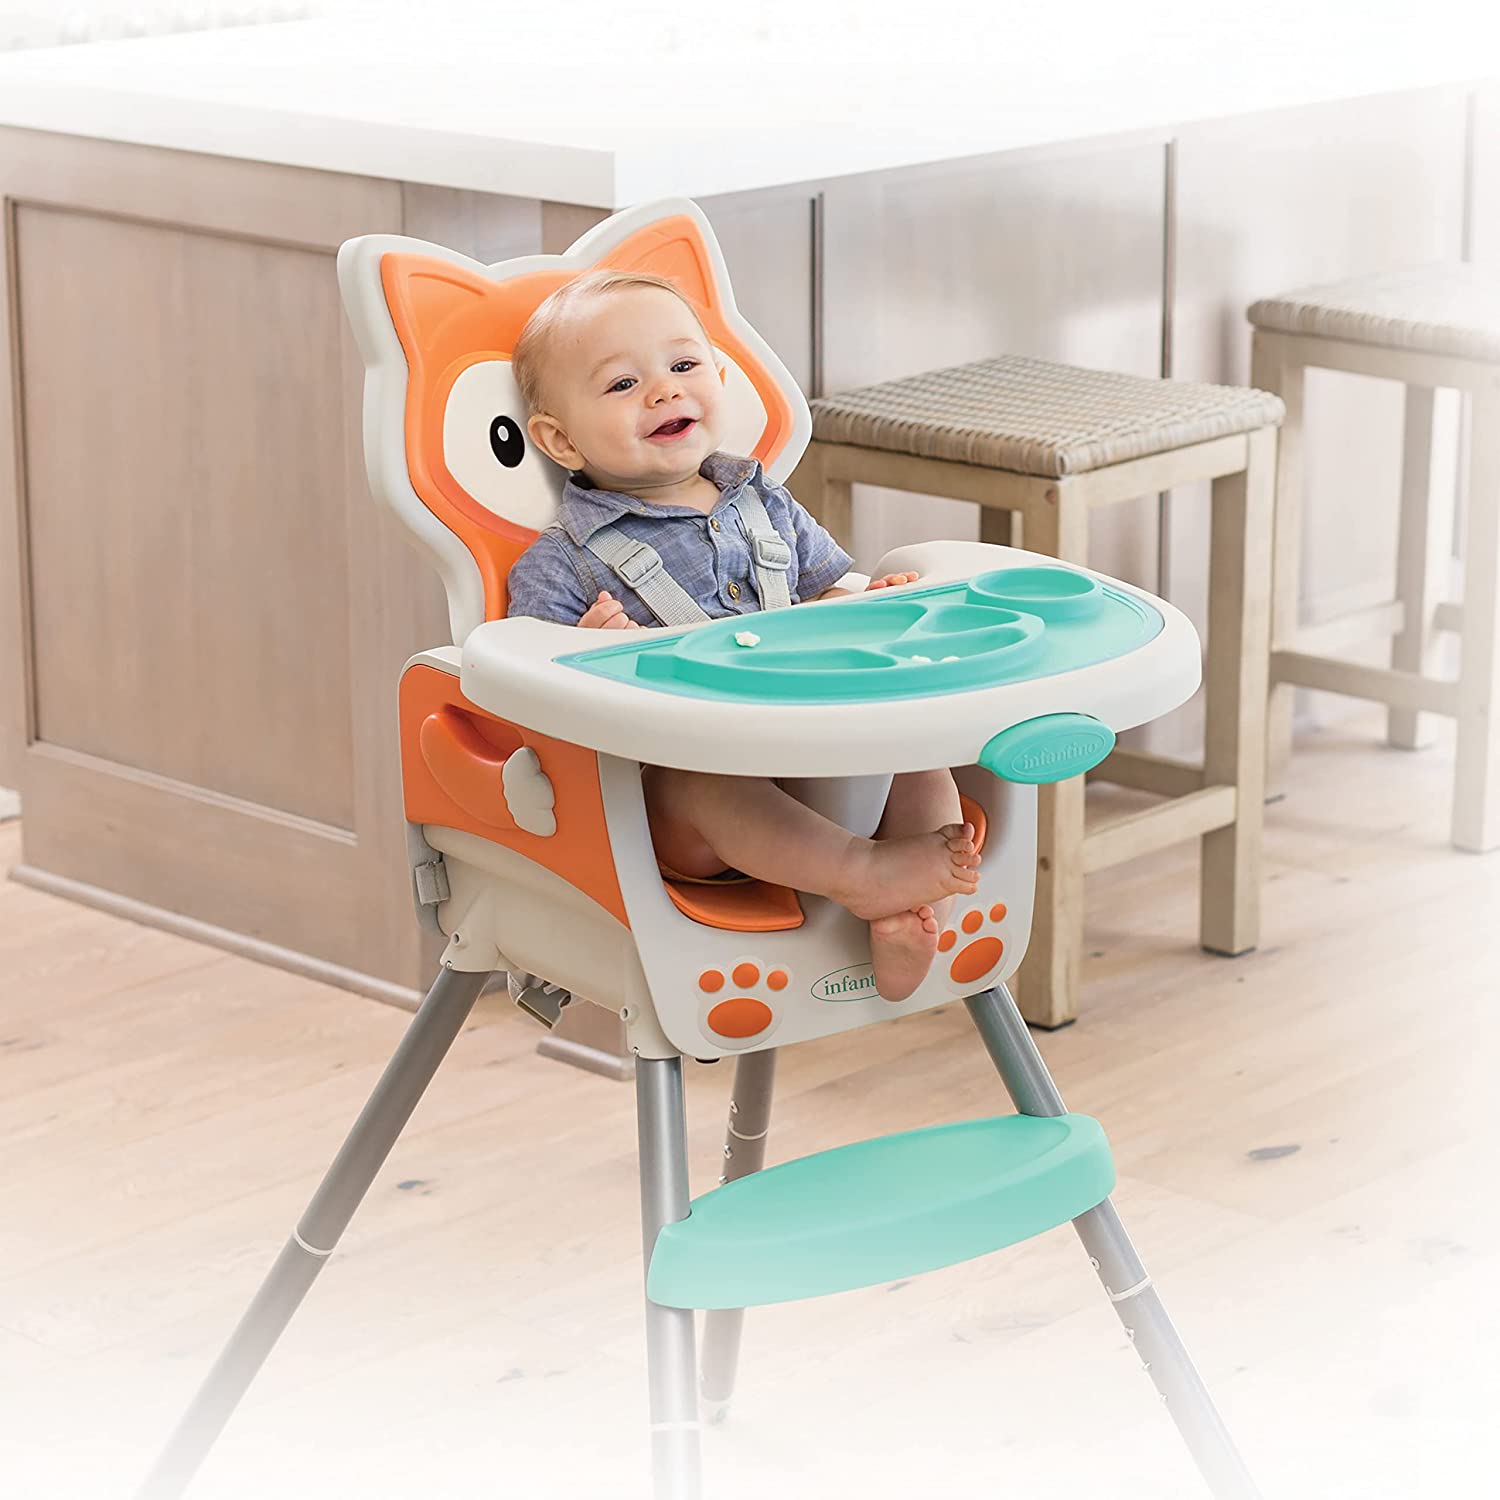 6. Infantino 4-in-1 High Chair